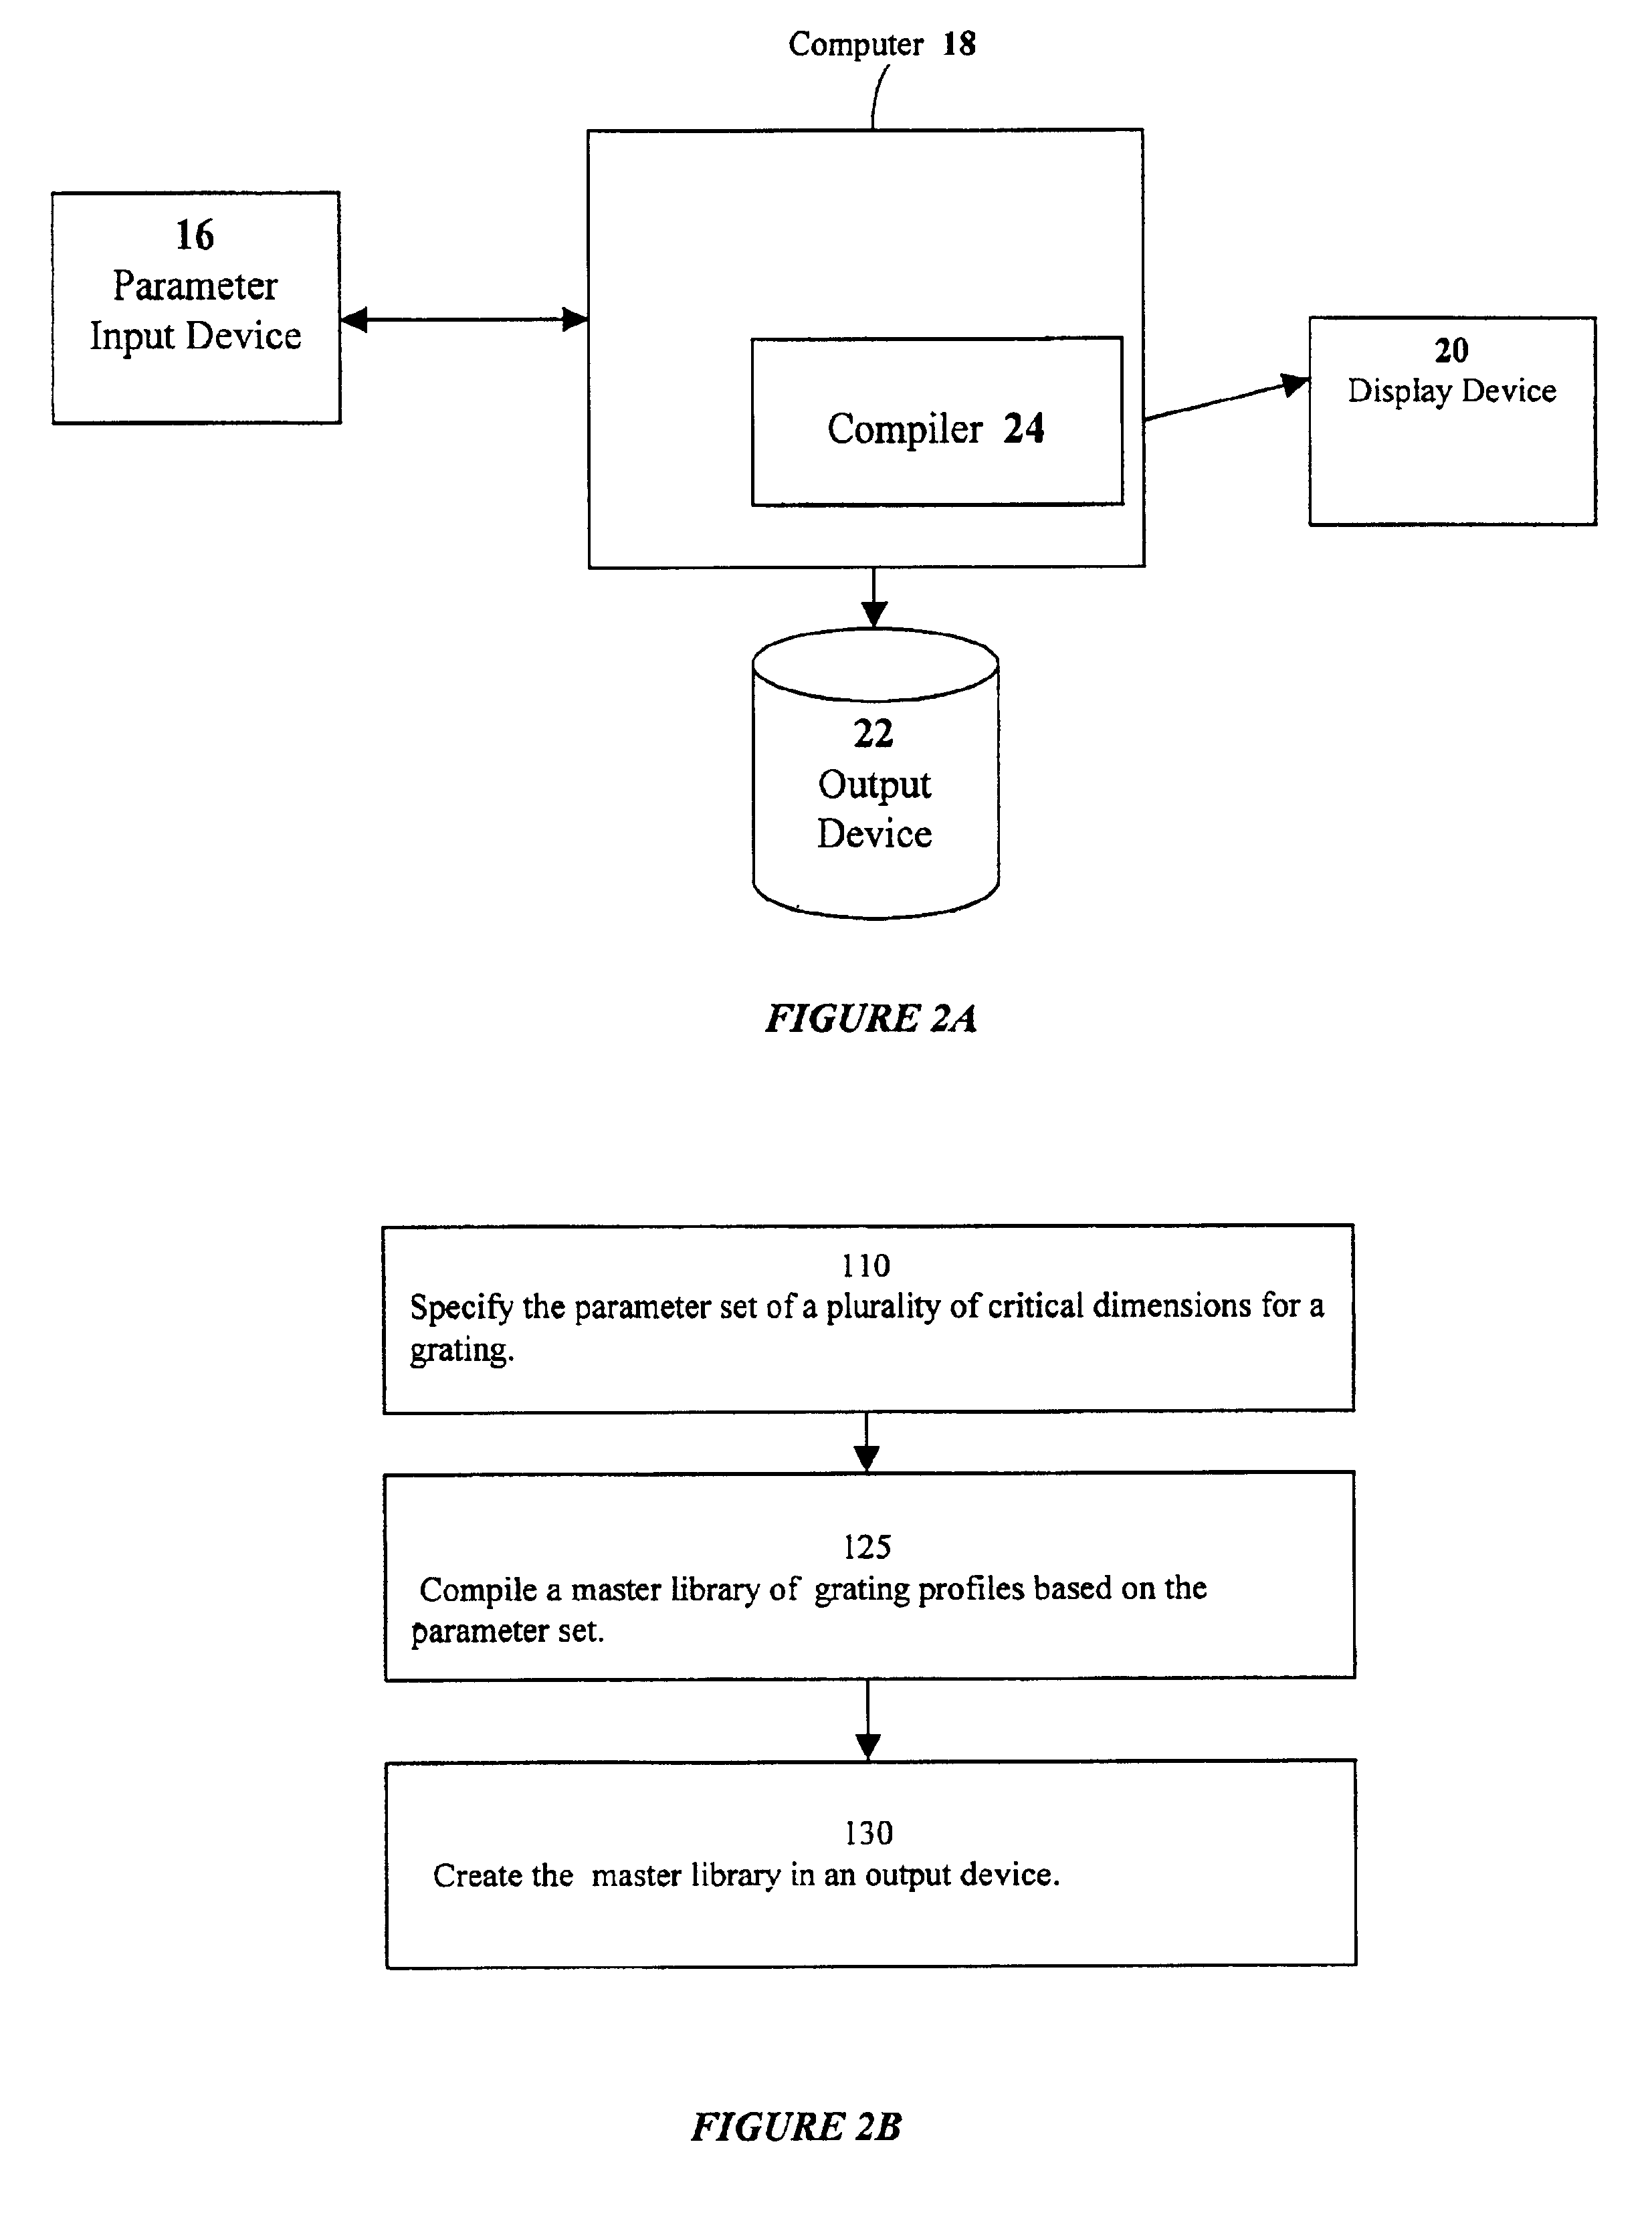 System and method for real-time library generation of grating profiles